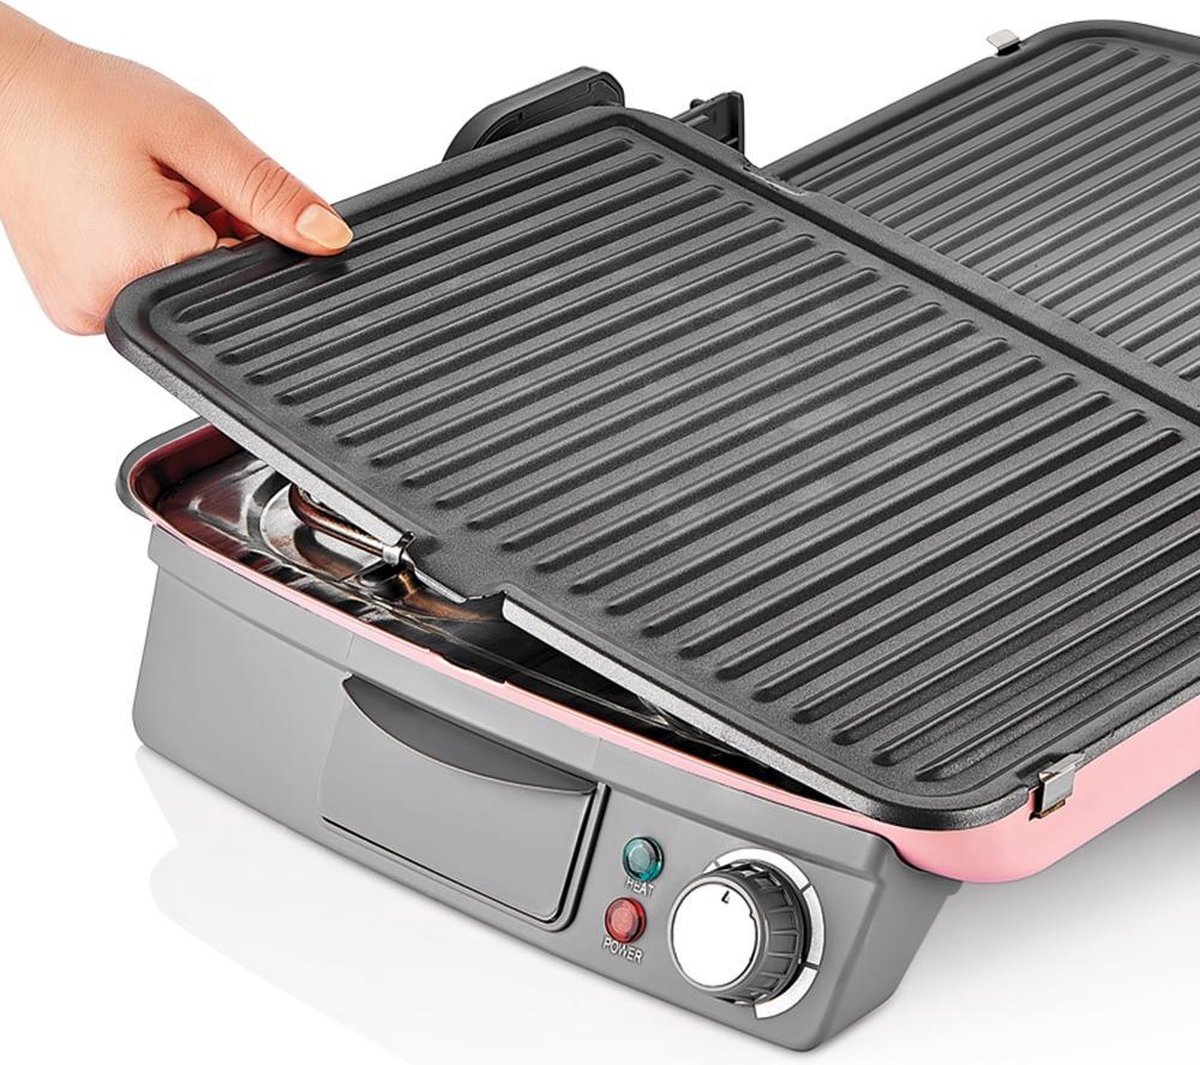 erts Ster cafetaria Sinbo SSM-2538 - Grill/Tosti apparaat - Roze | bol.com